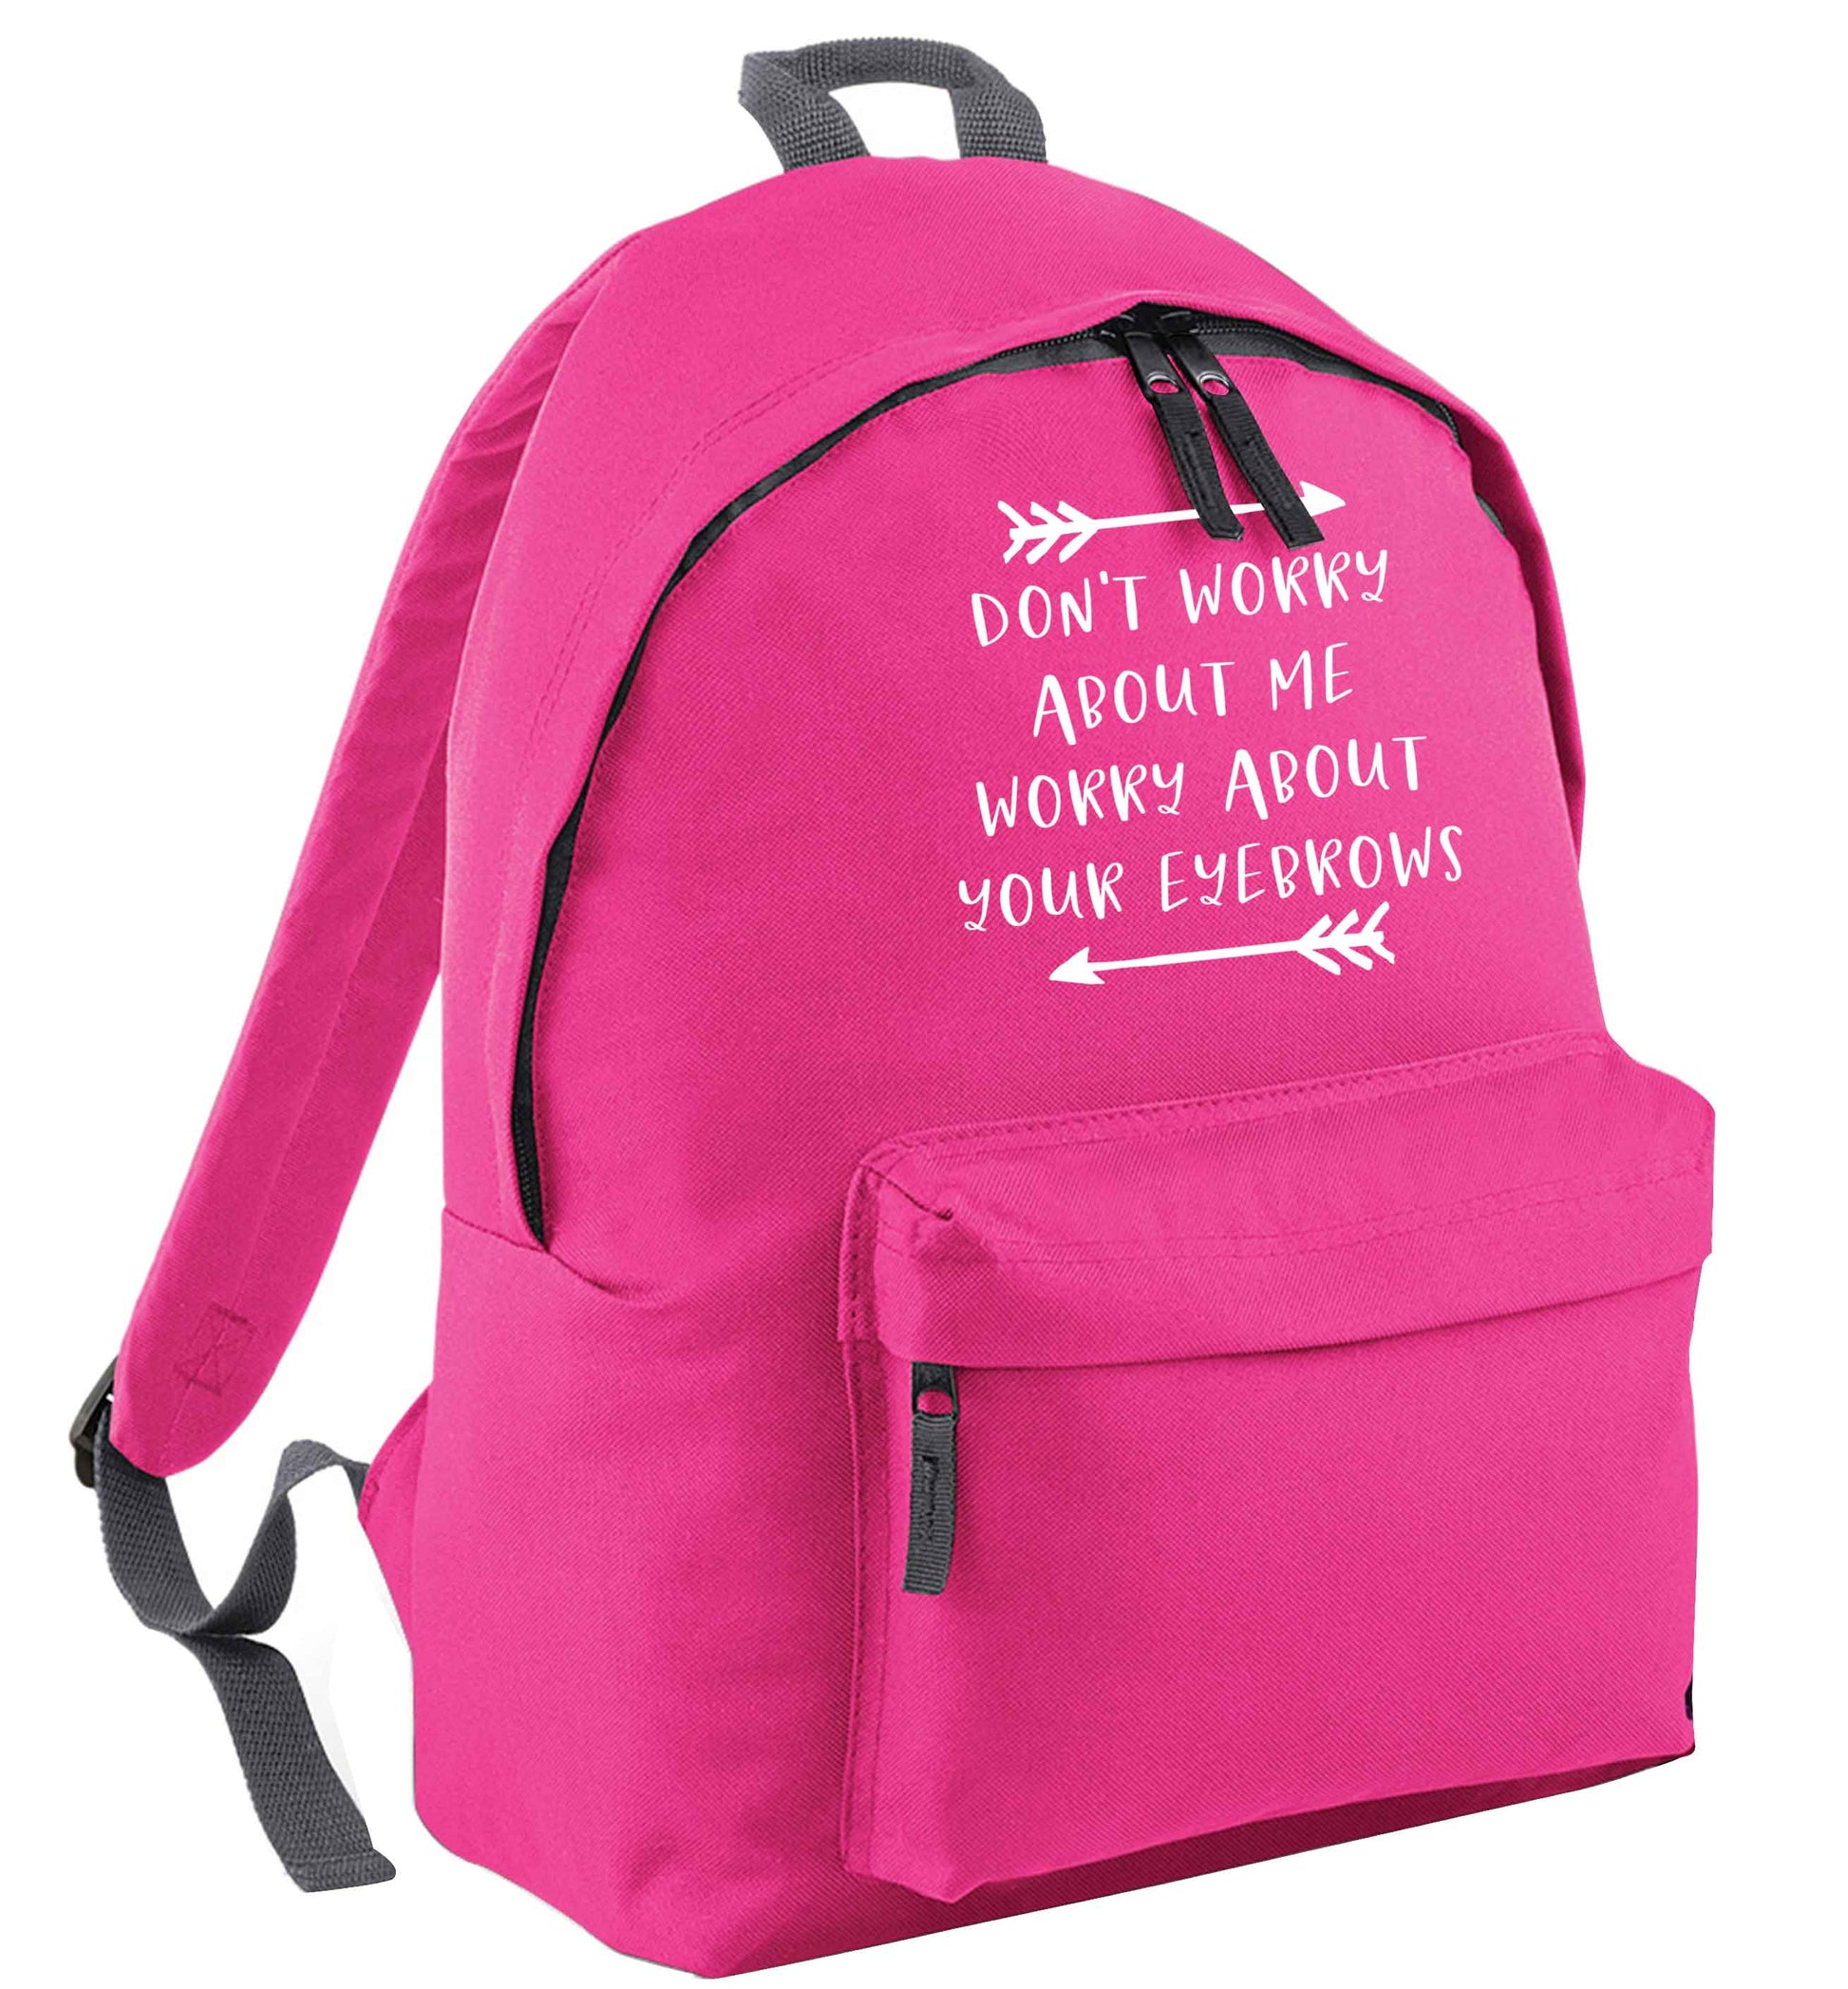 Don't worry about me worry about your eyebrows | Children's backpack